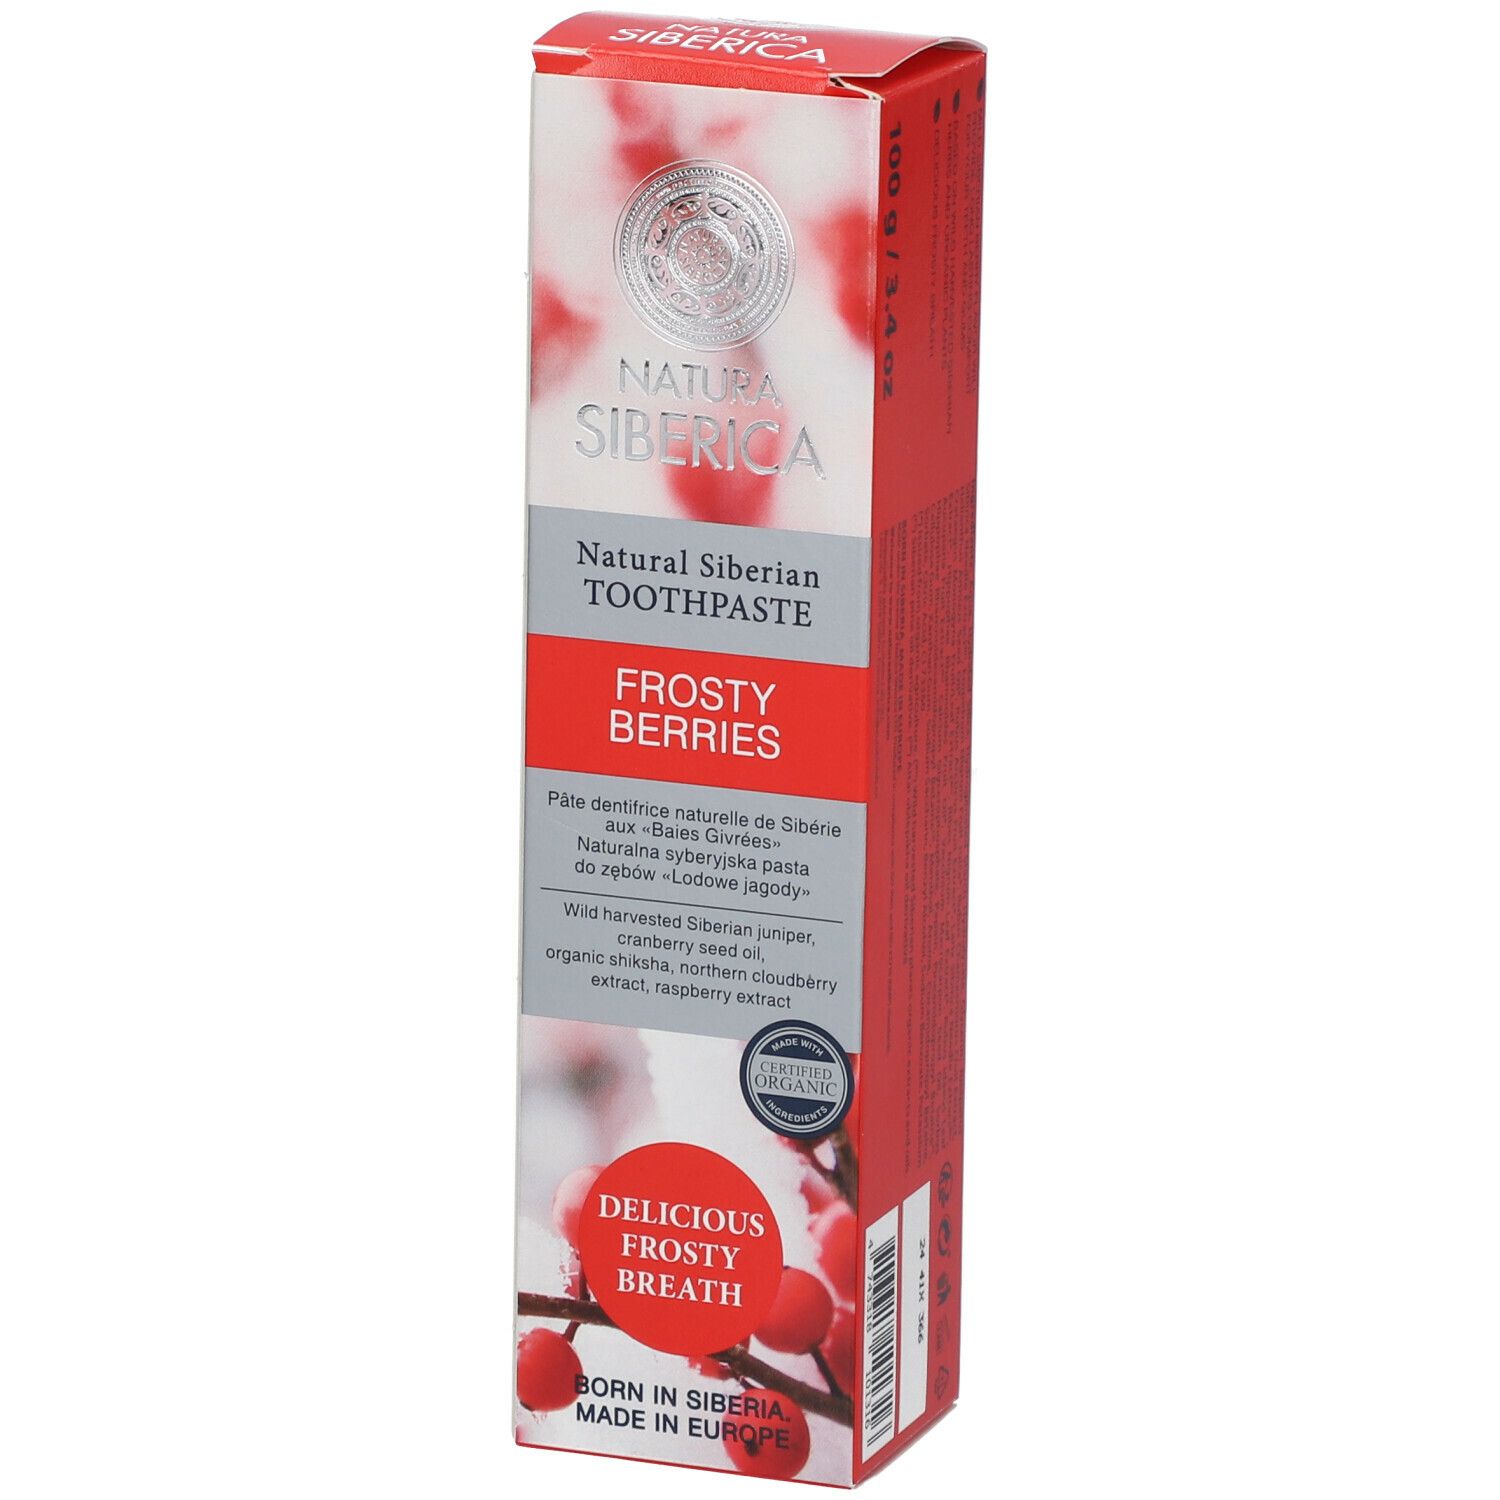 Natura Siberica Natural Siberian toothpaste Frosty berries, 100 gr